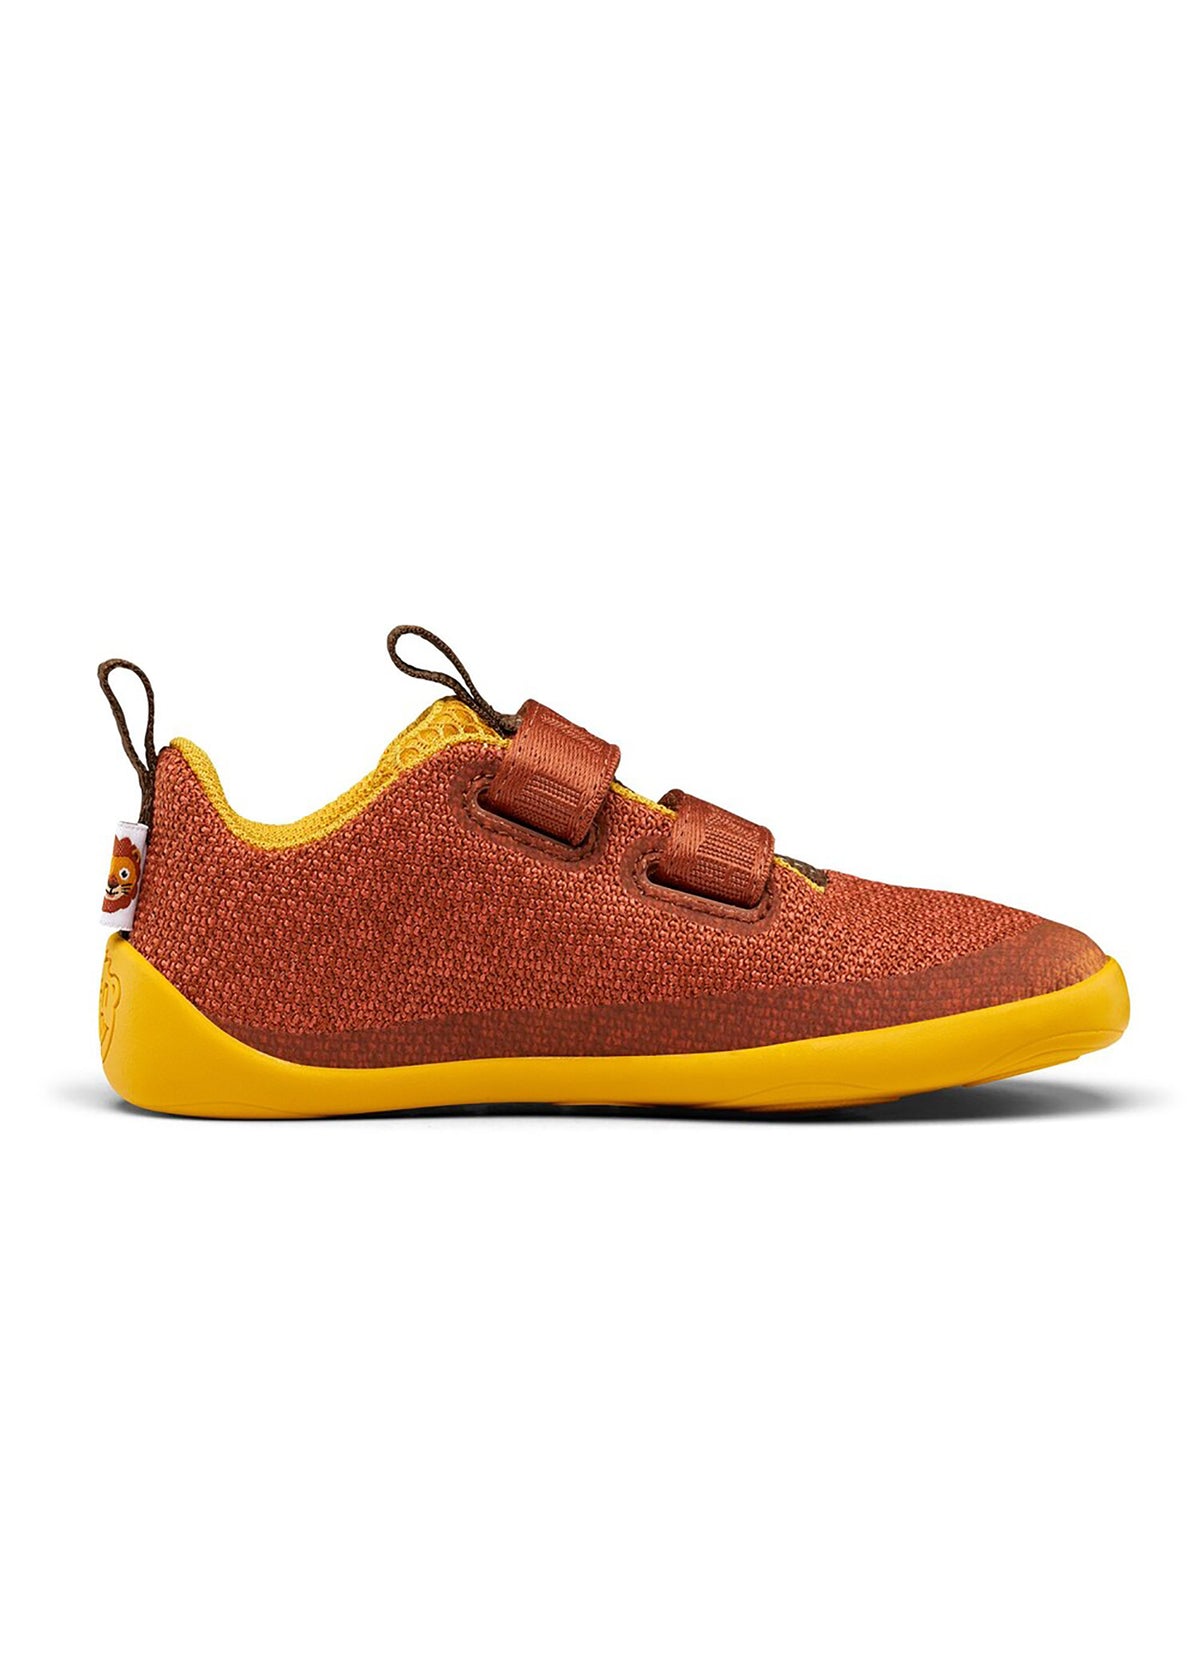 Children's barefoot sneakers - Knit Happy, Lion